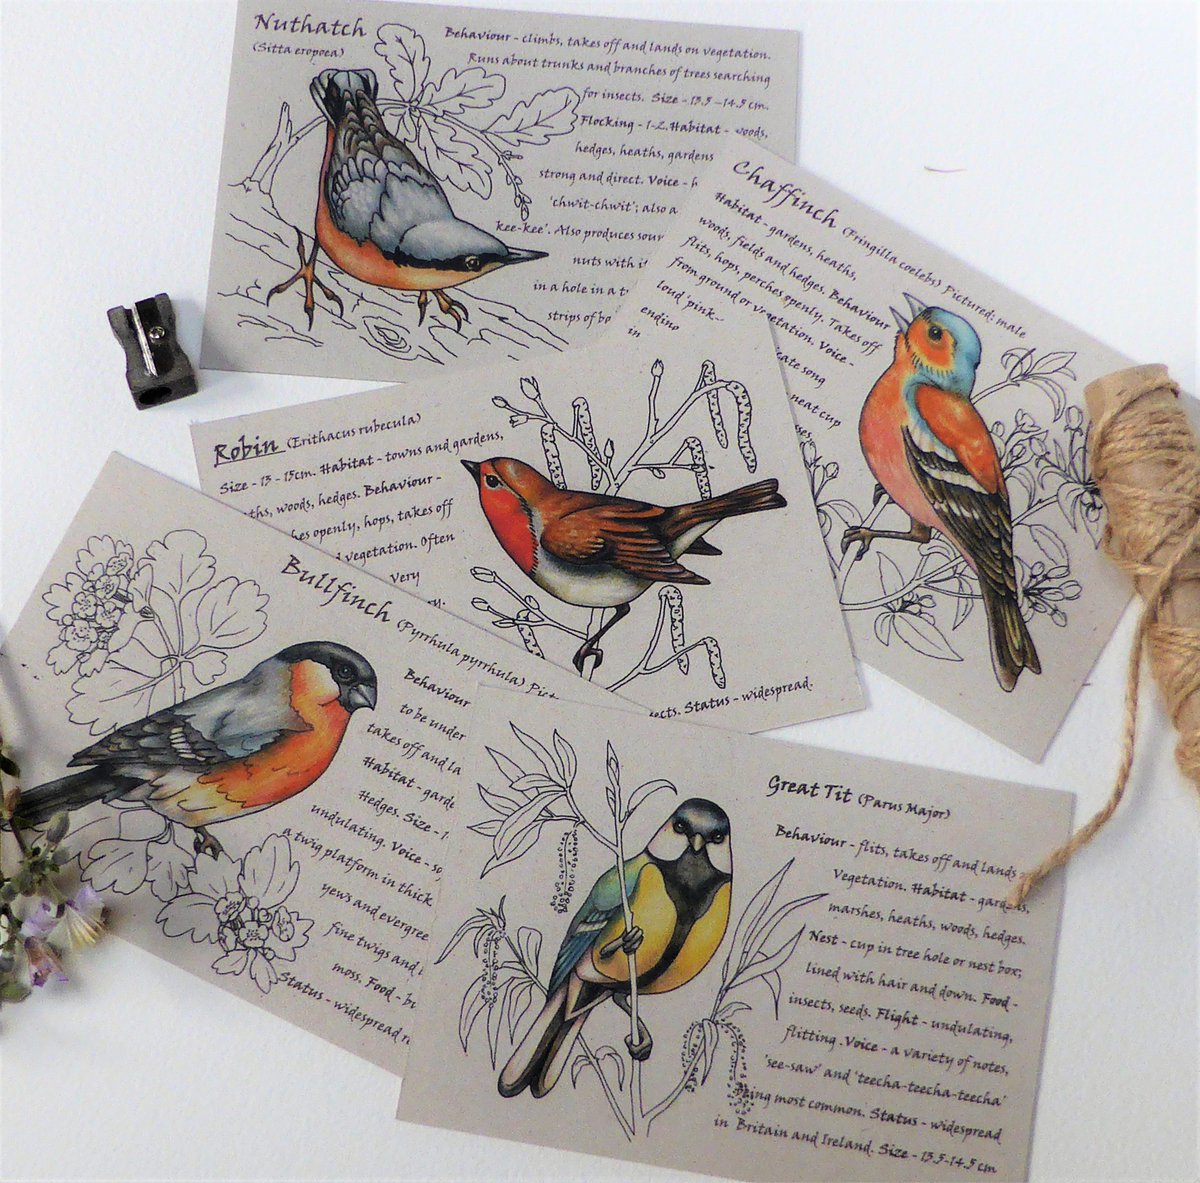 Hi #UKGiftHour #UKGiftAM Are you looking for a gift for a nature lover - I might have just the thing 🌿

etsy.com/uk/listing/547…

#birdwatching #naturelovers #gardenbirds #giftsforgardeners #FathersDayGifts #SupportSmallBusinesses